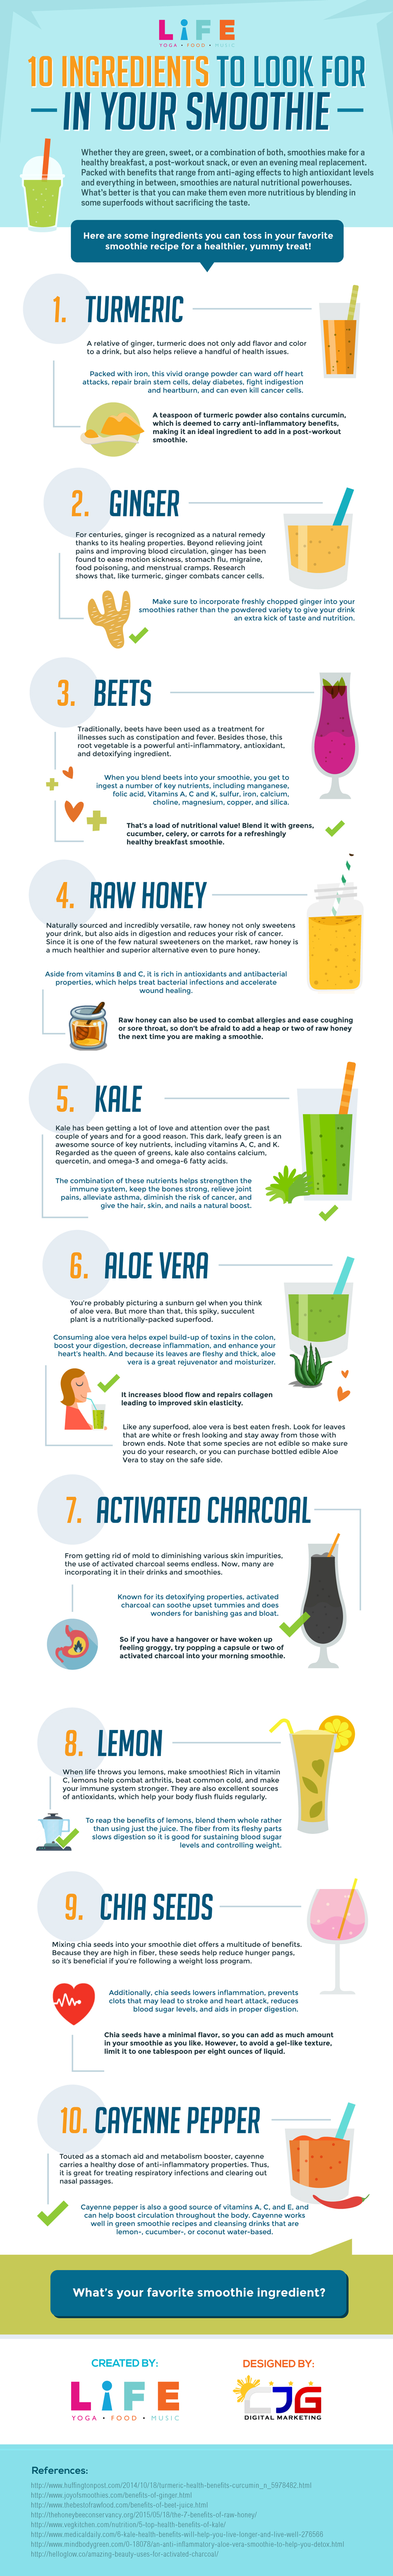 10 Perfect Superfood Ingredients For Your Super Smoothies Infographic